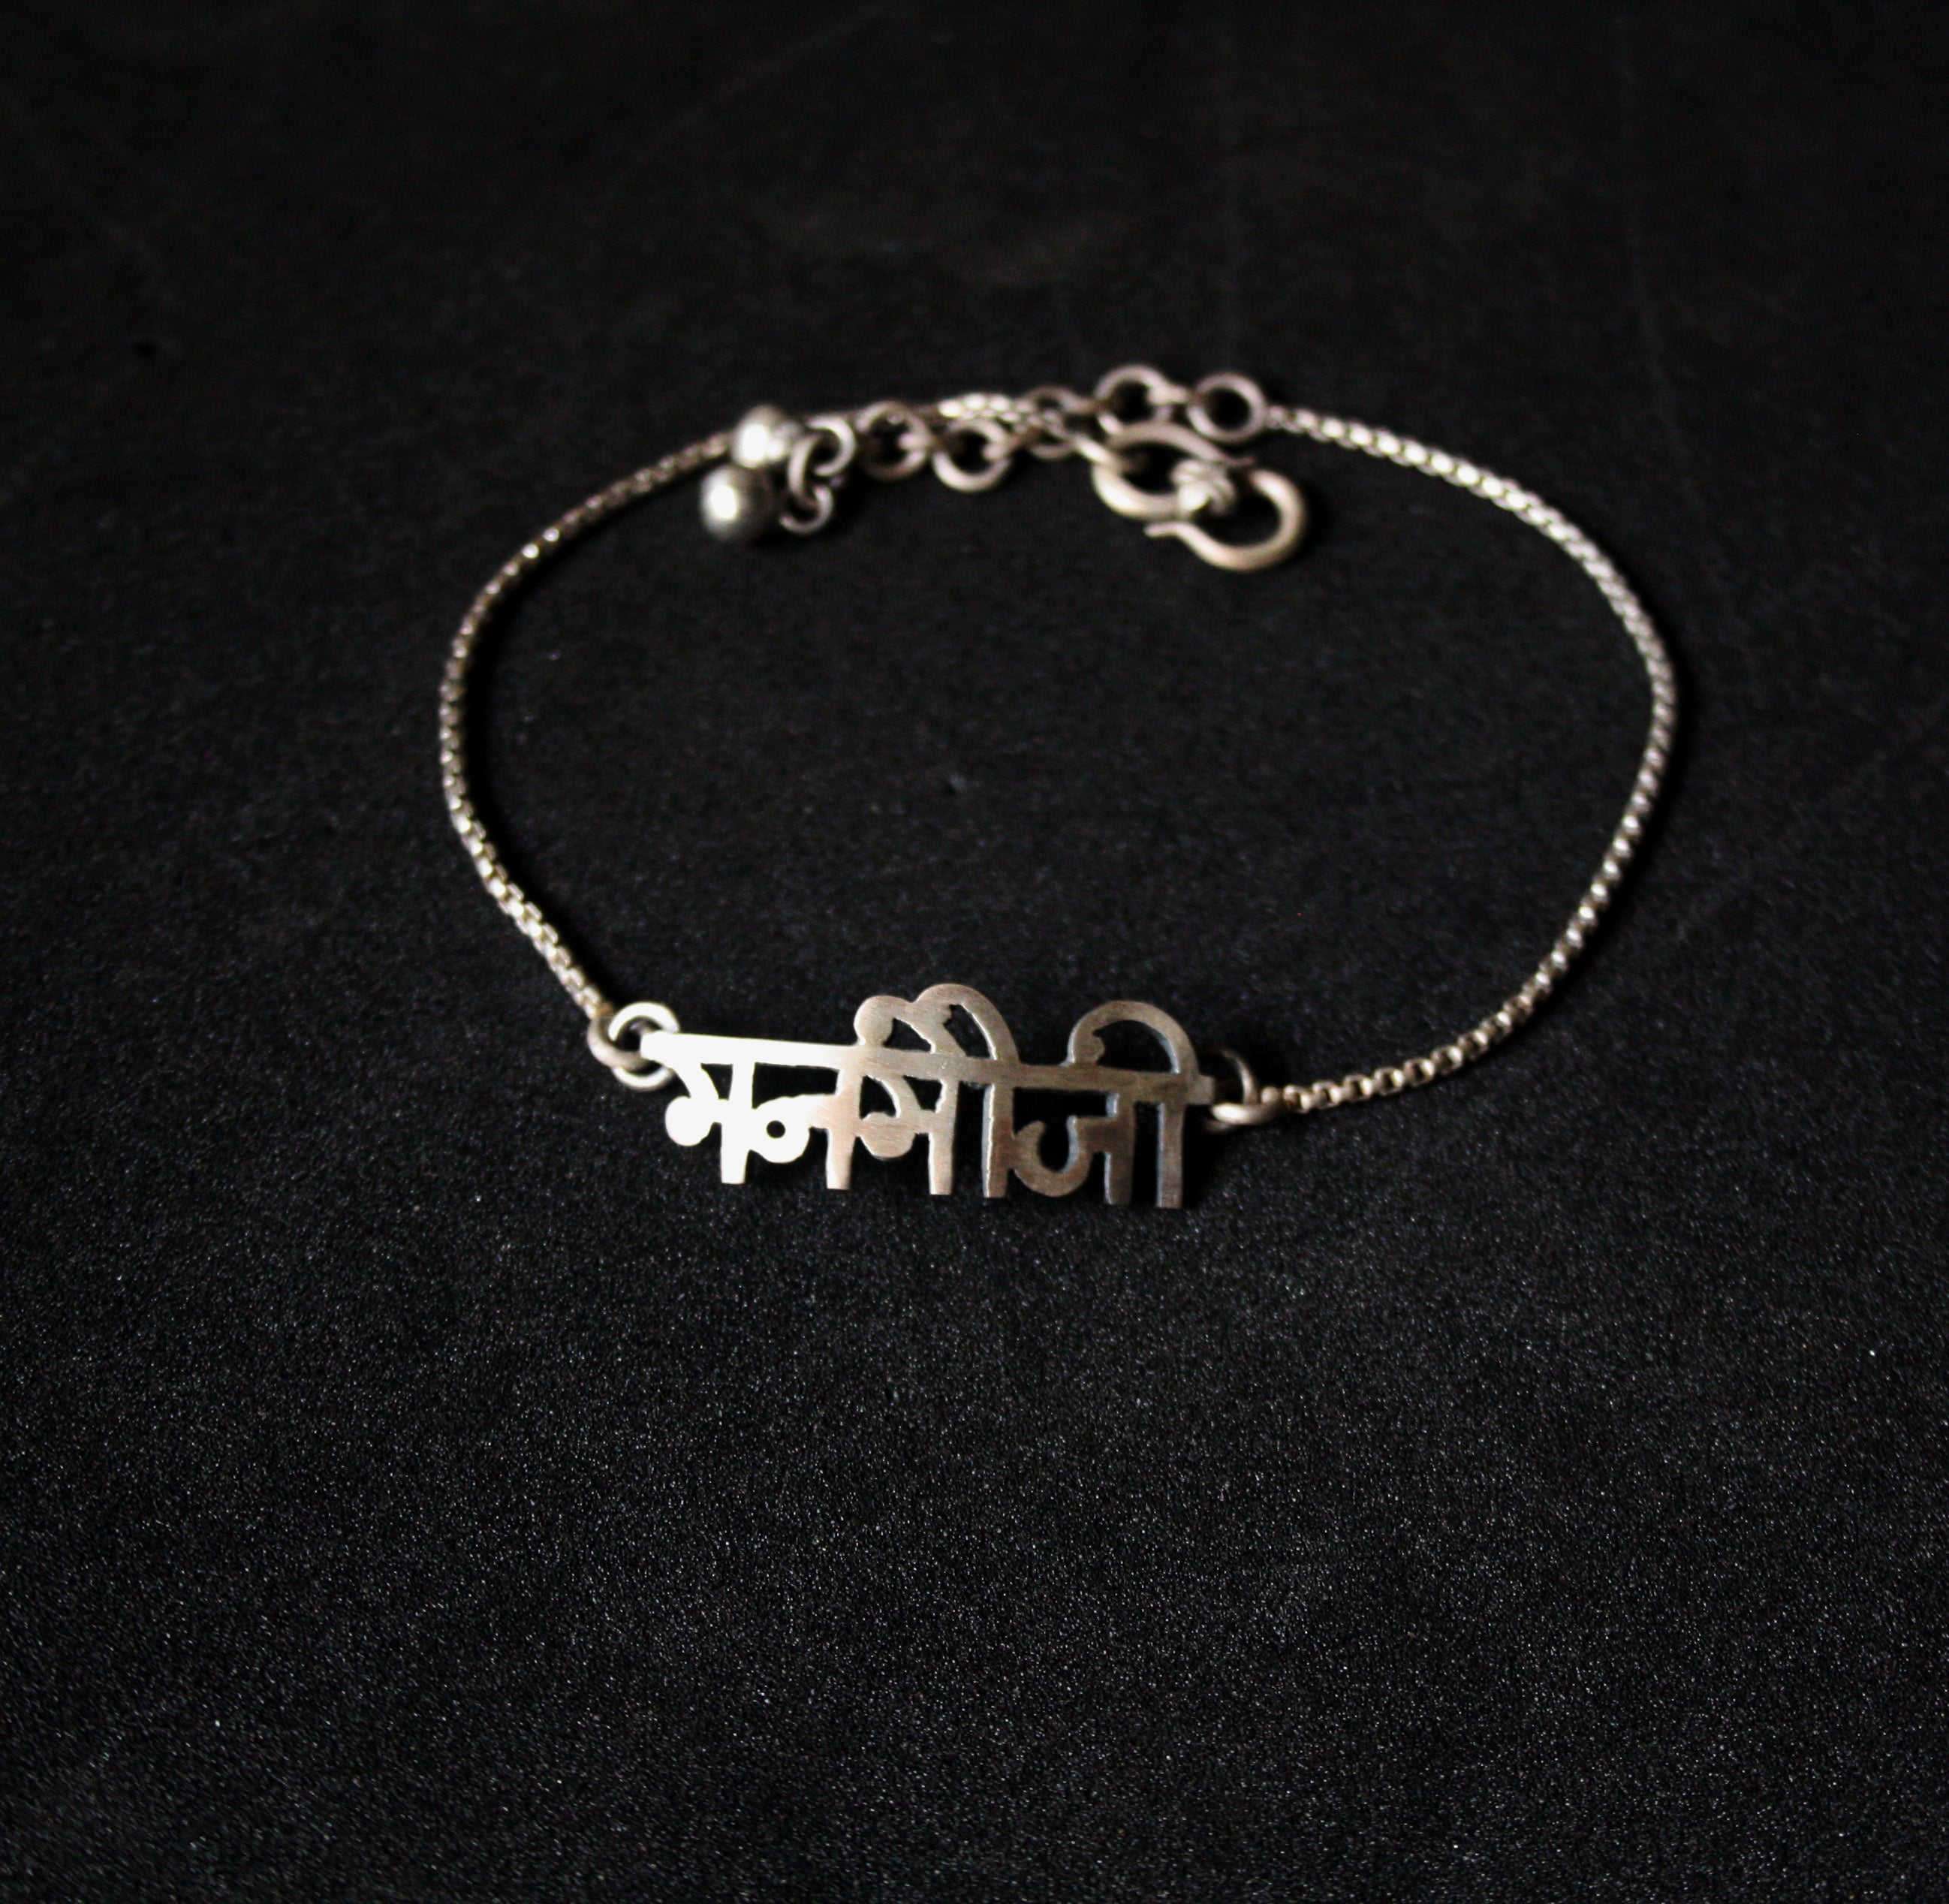 Buy Sterling Silver Anklets for Women - Quirksmith Manmauji Anklet